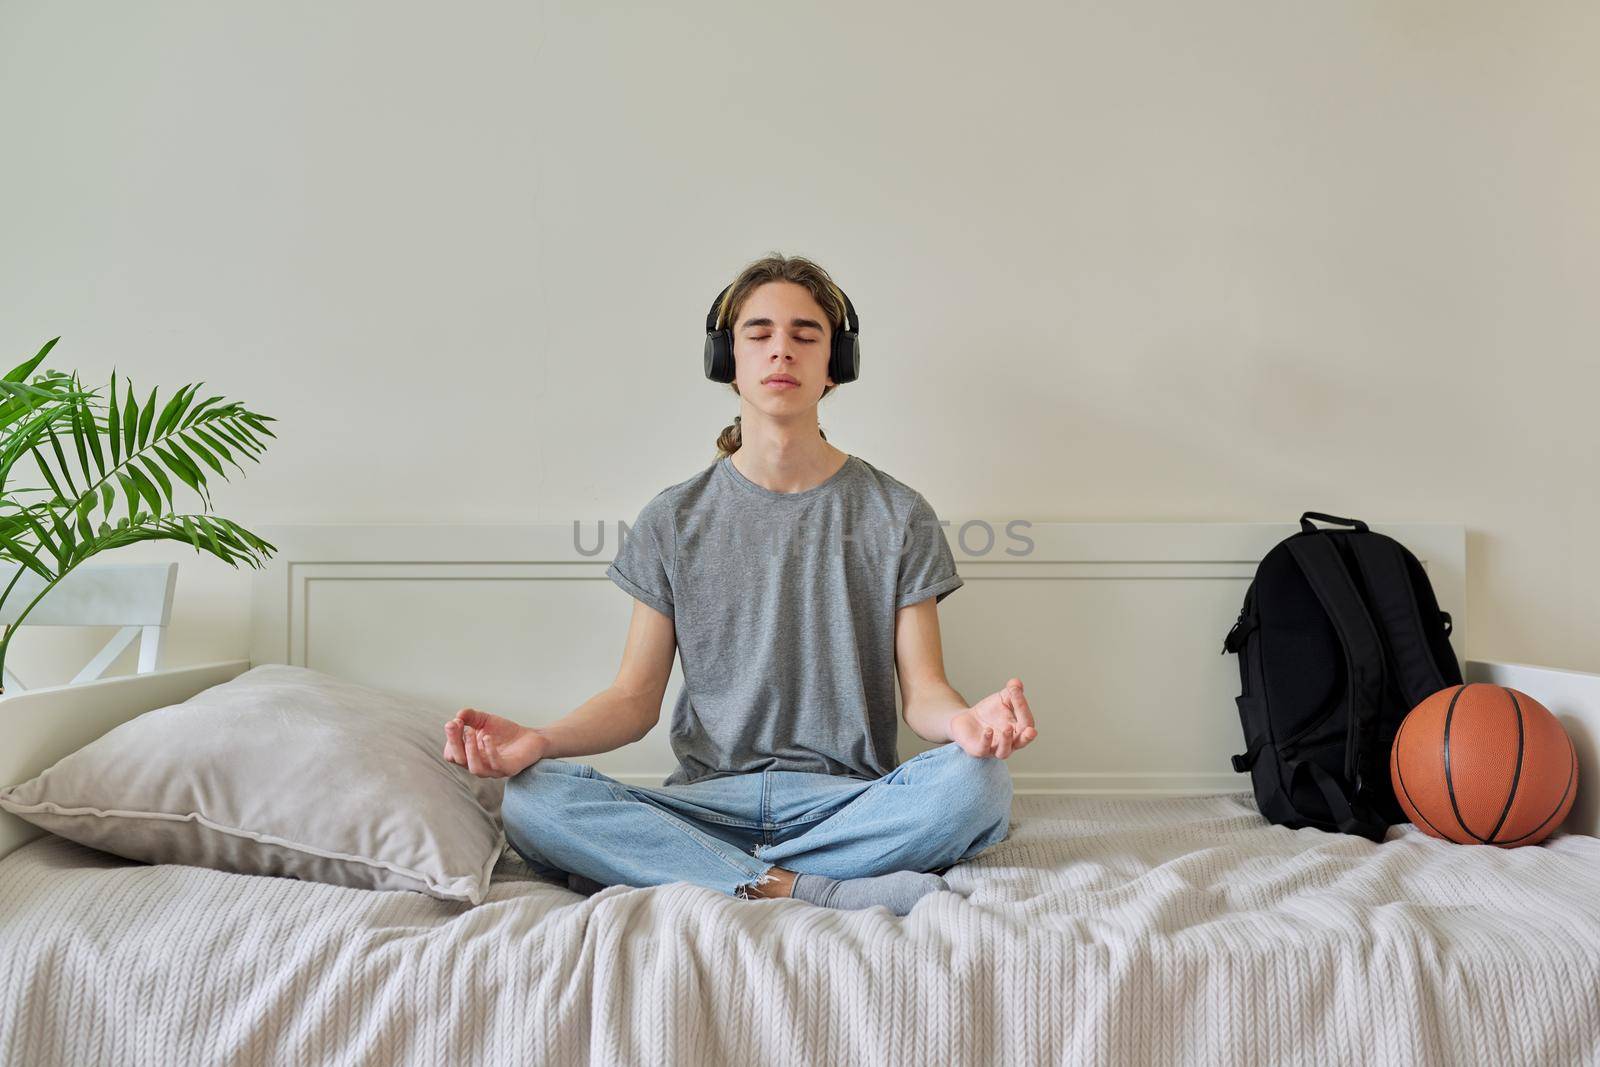 Male teenager sitting in lotus position on bed relaxing meditating by VH-studio